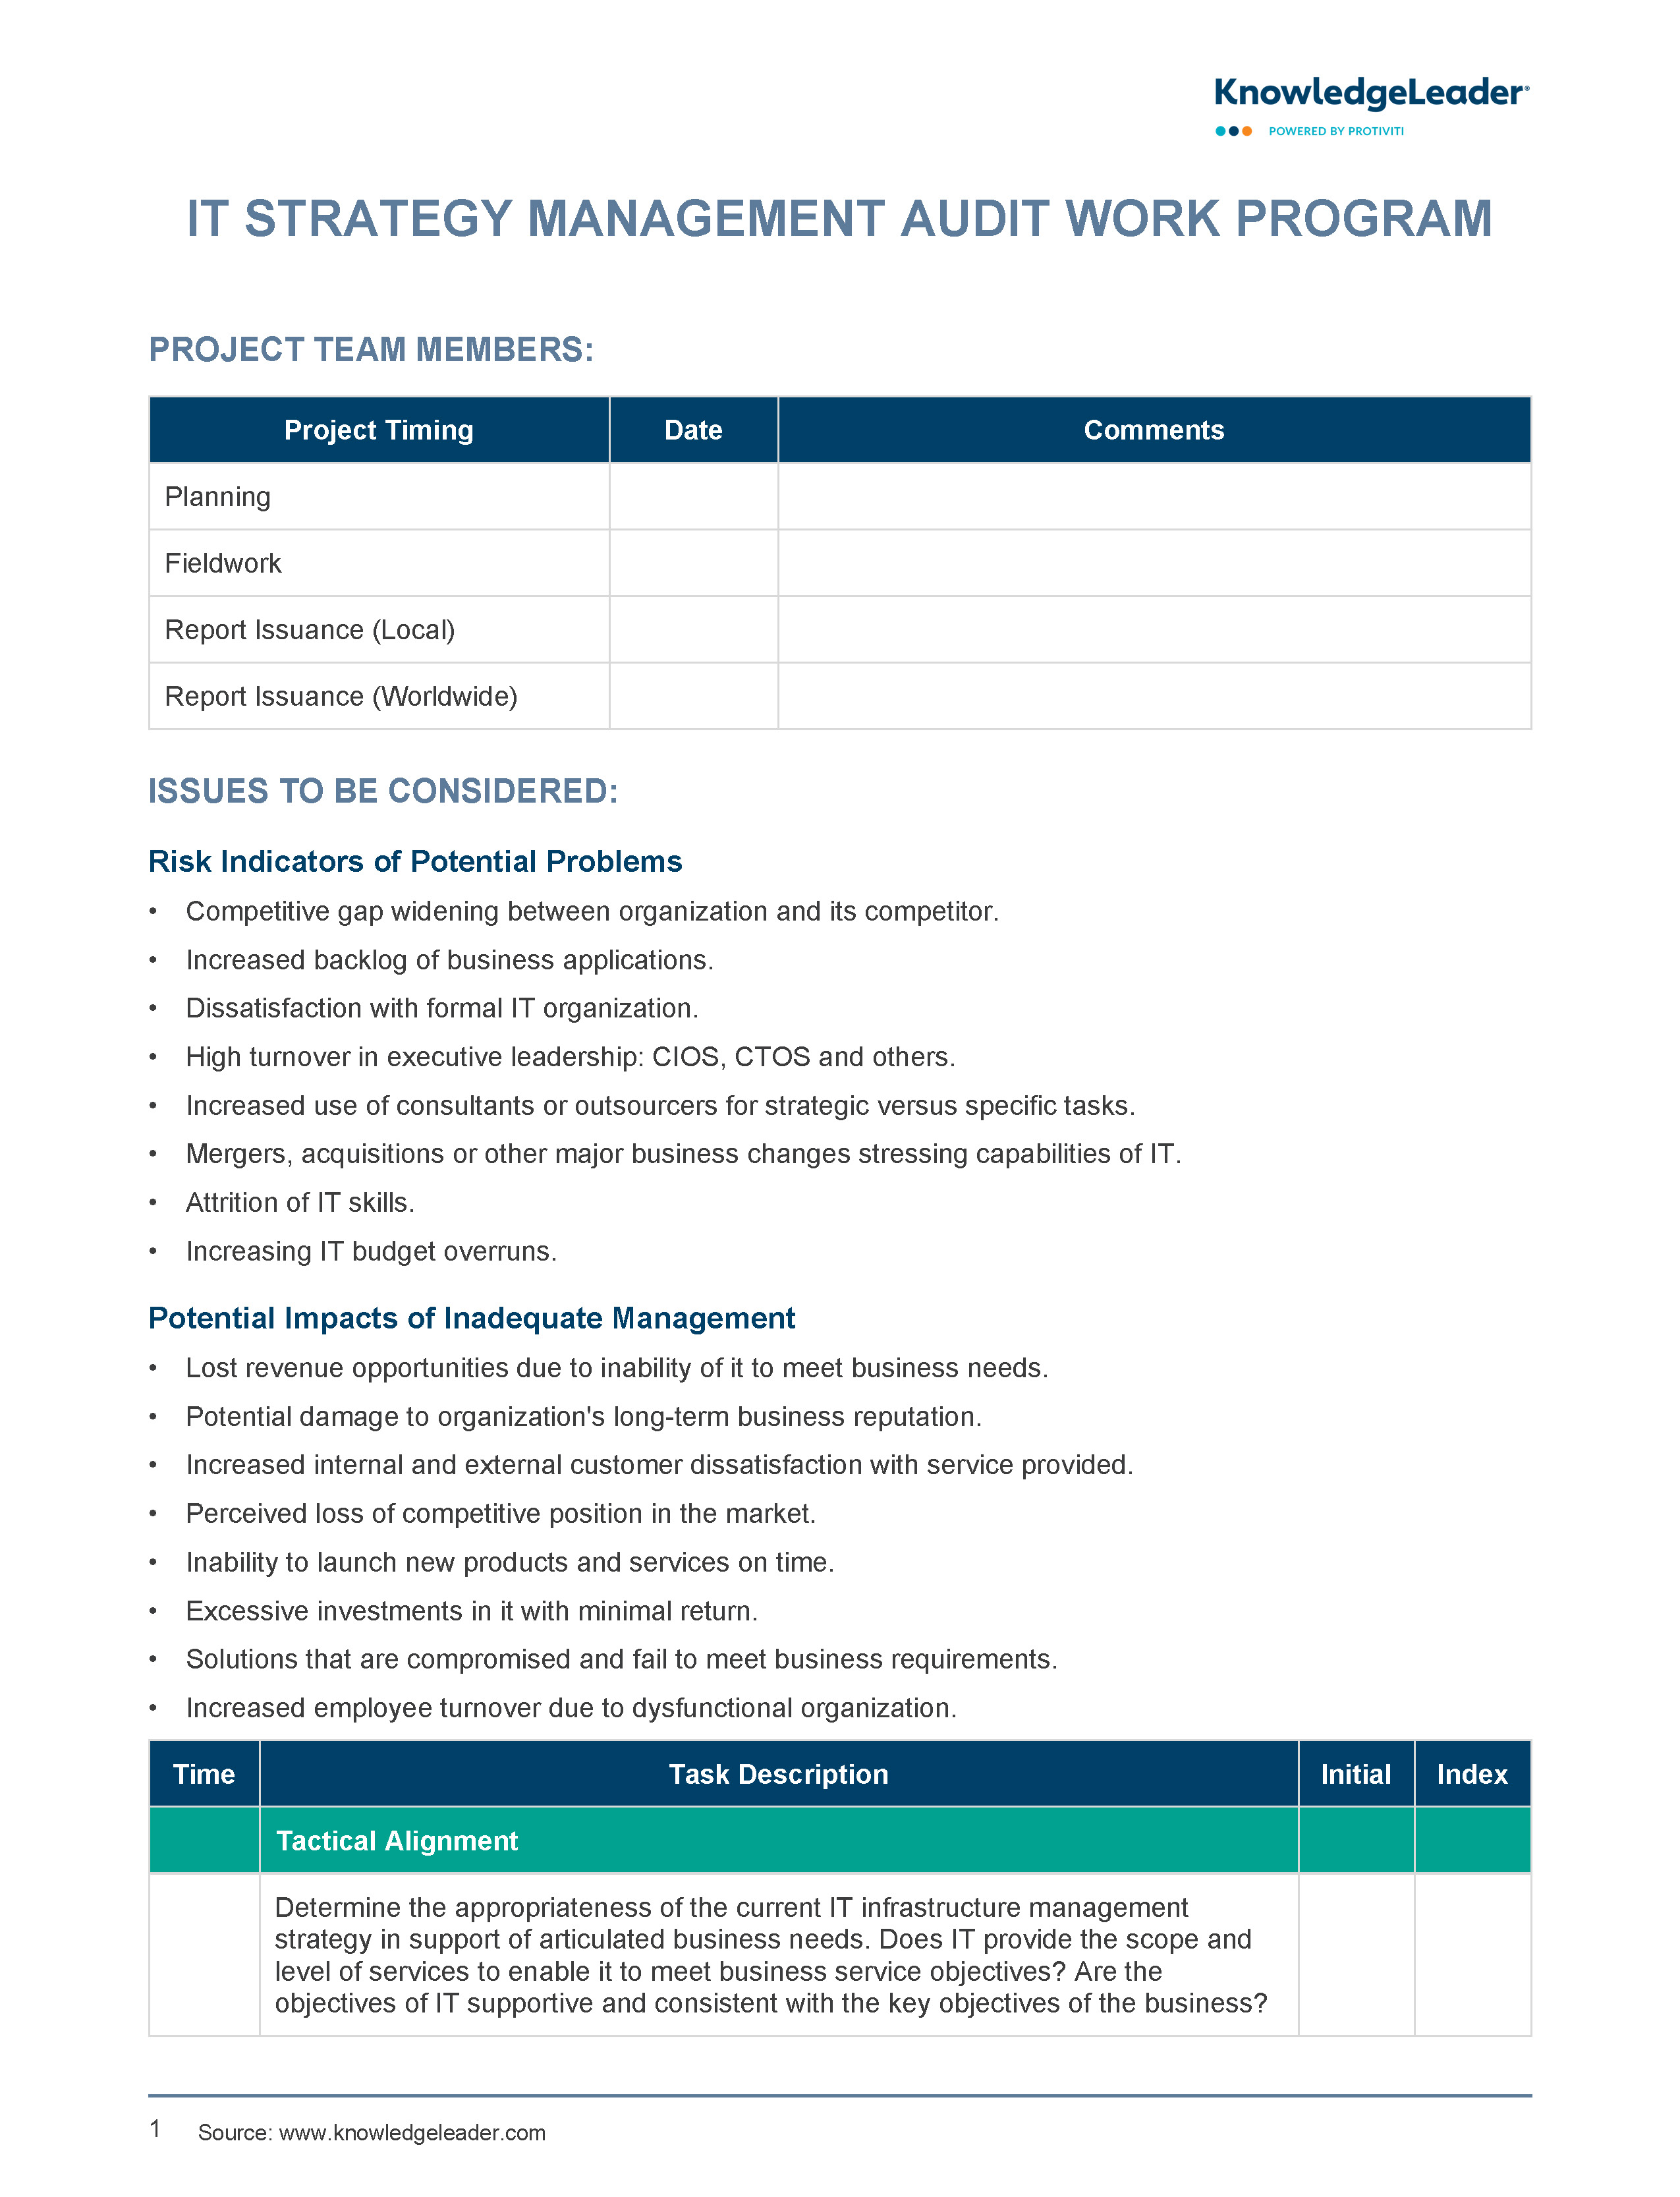 Screenshot of the first page of IT Strategy Management Work Program